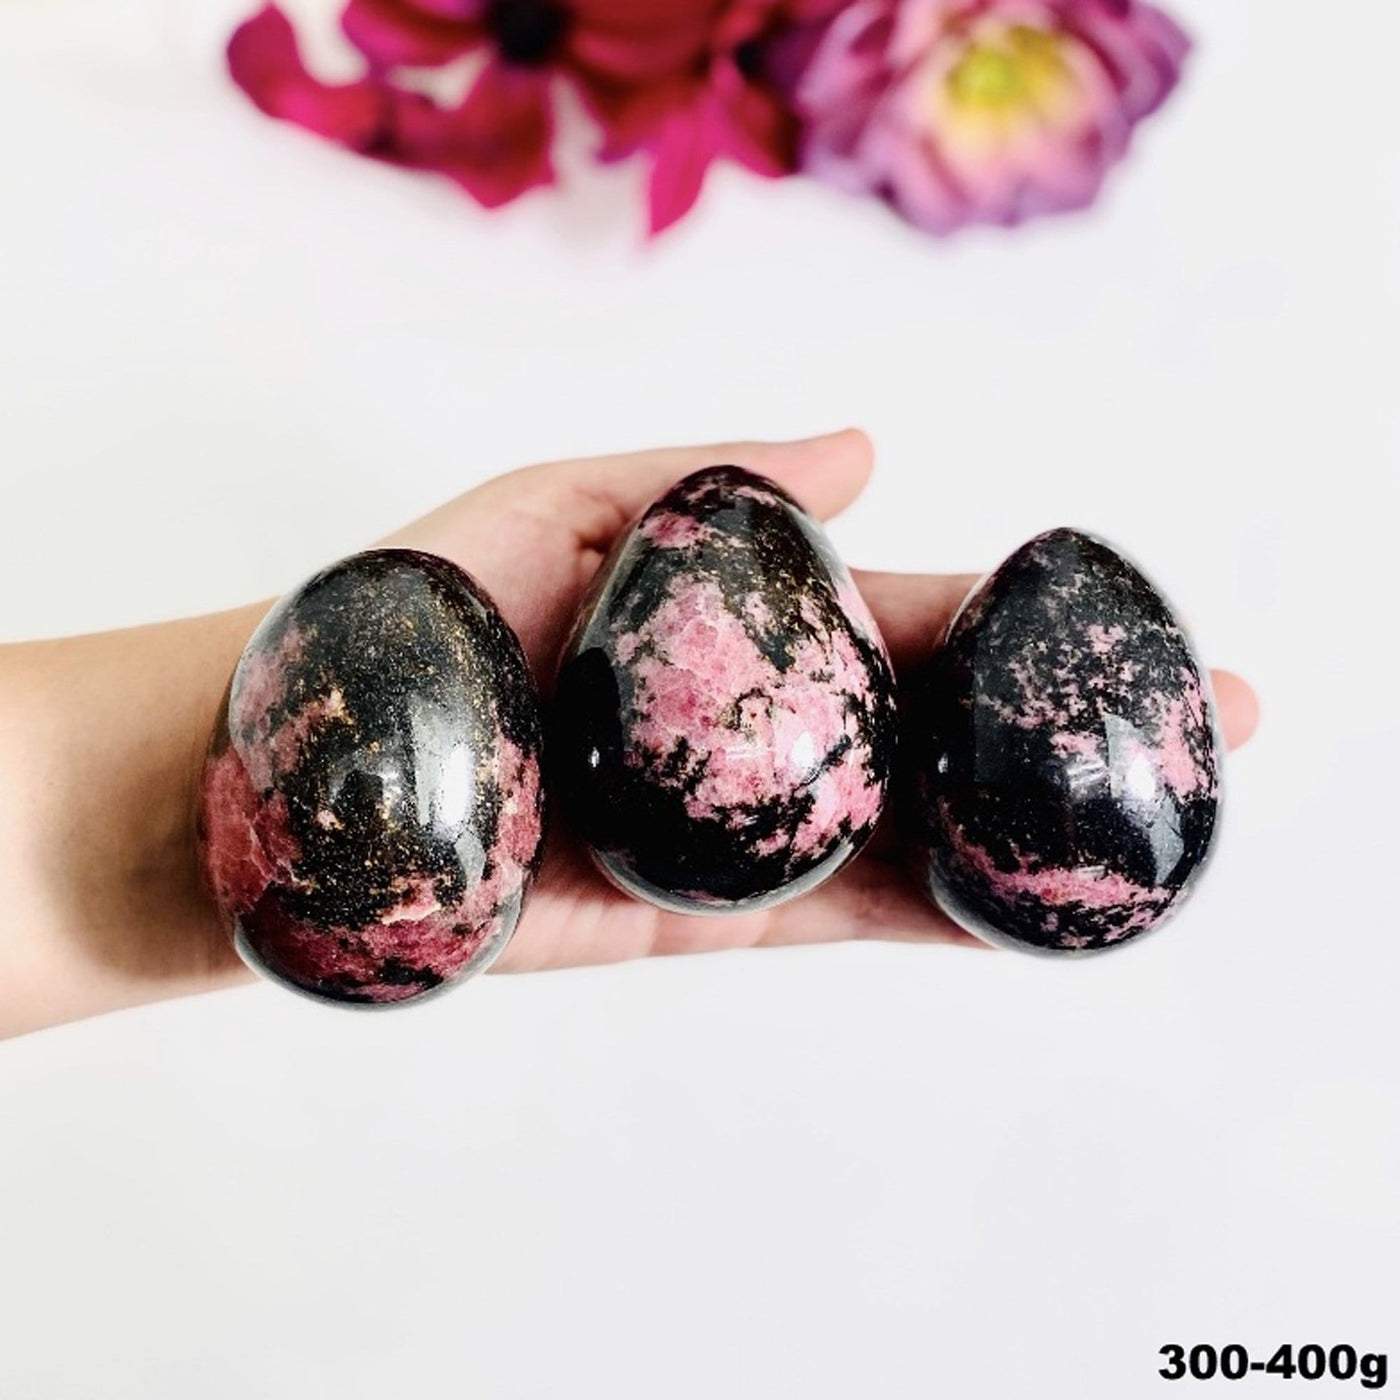 Hand holding up 300-400g Rhodonite Palm Stones with flowers blurred on white background